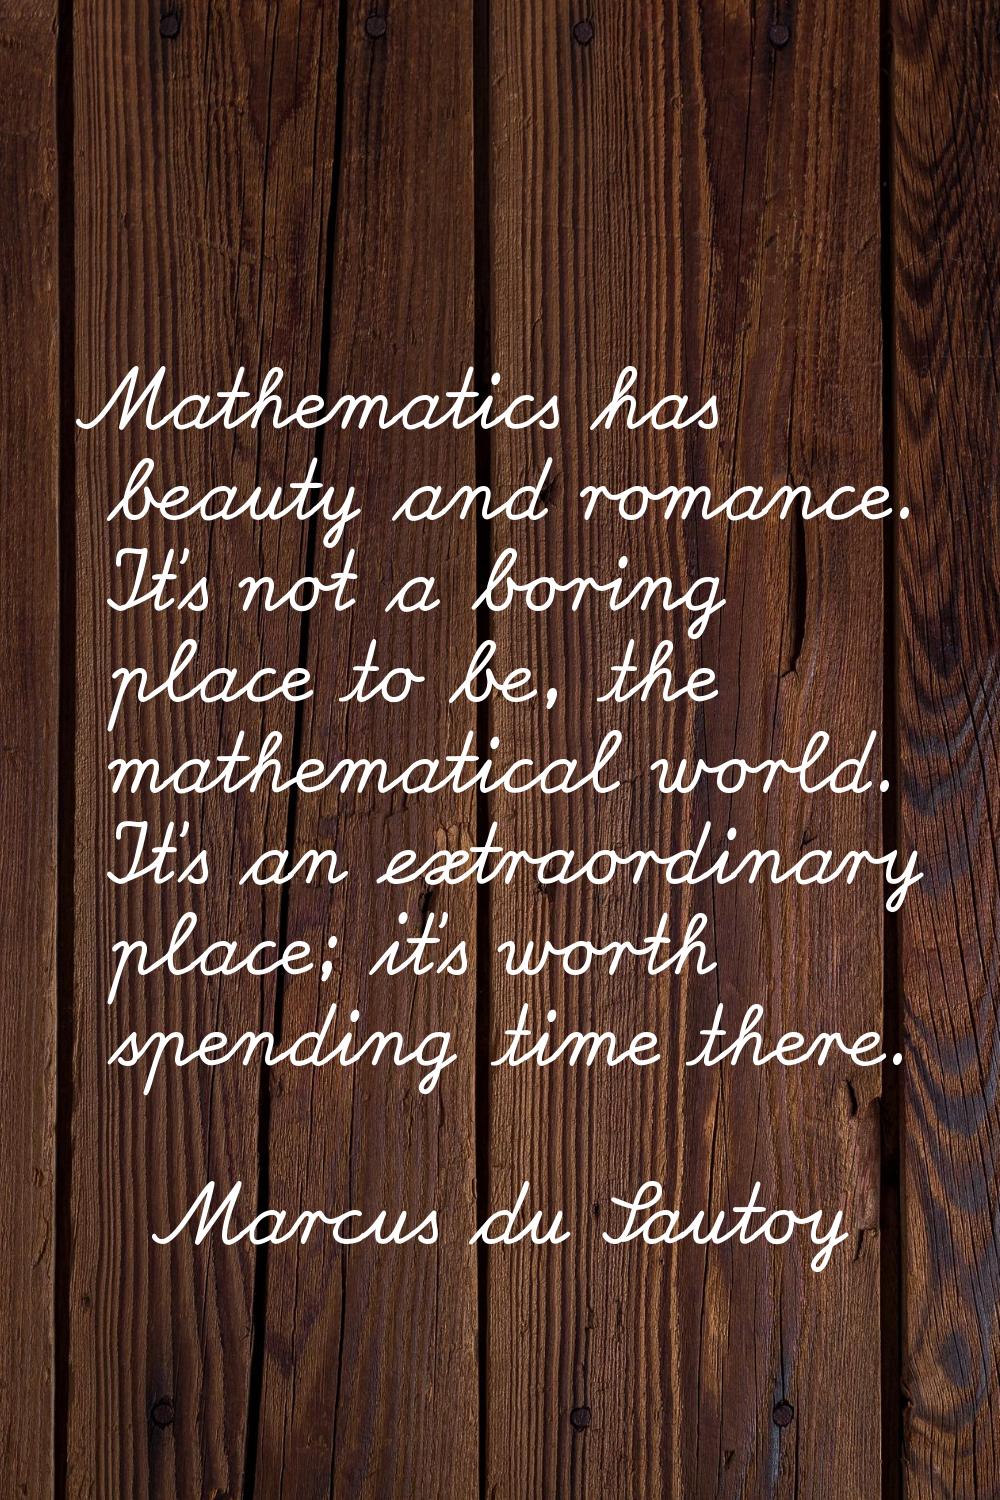 Mathematics has beauty and romance. It's not a boring place to be, the mathematical world. It's an 